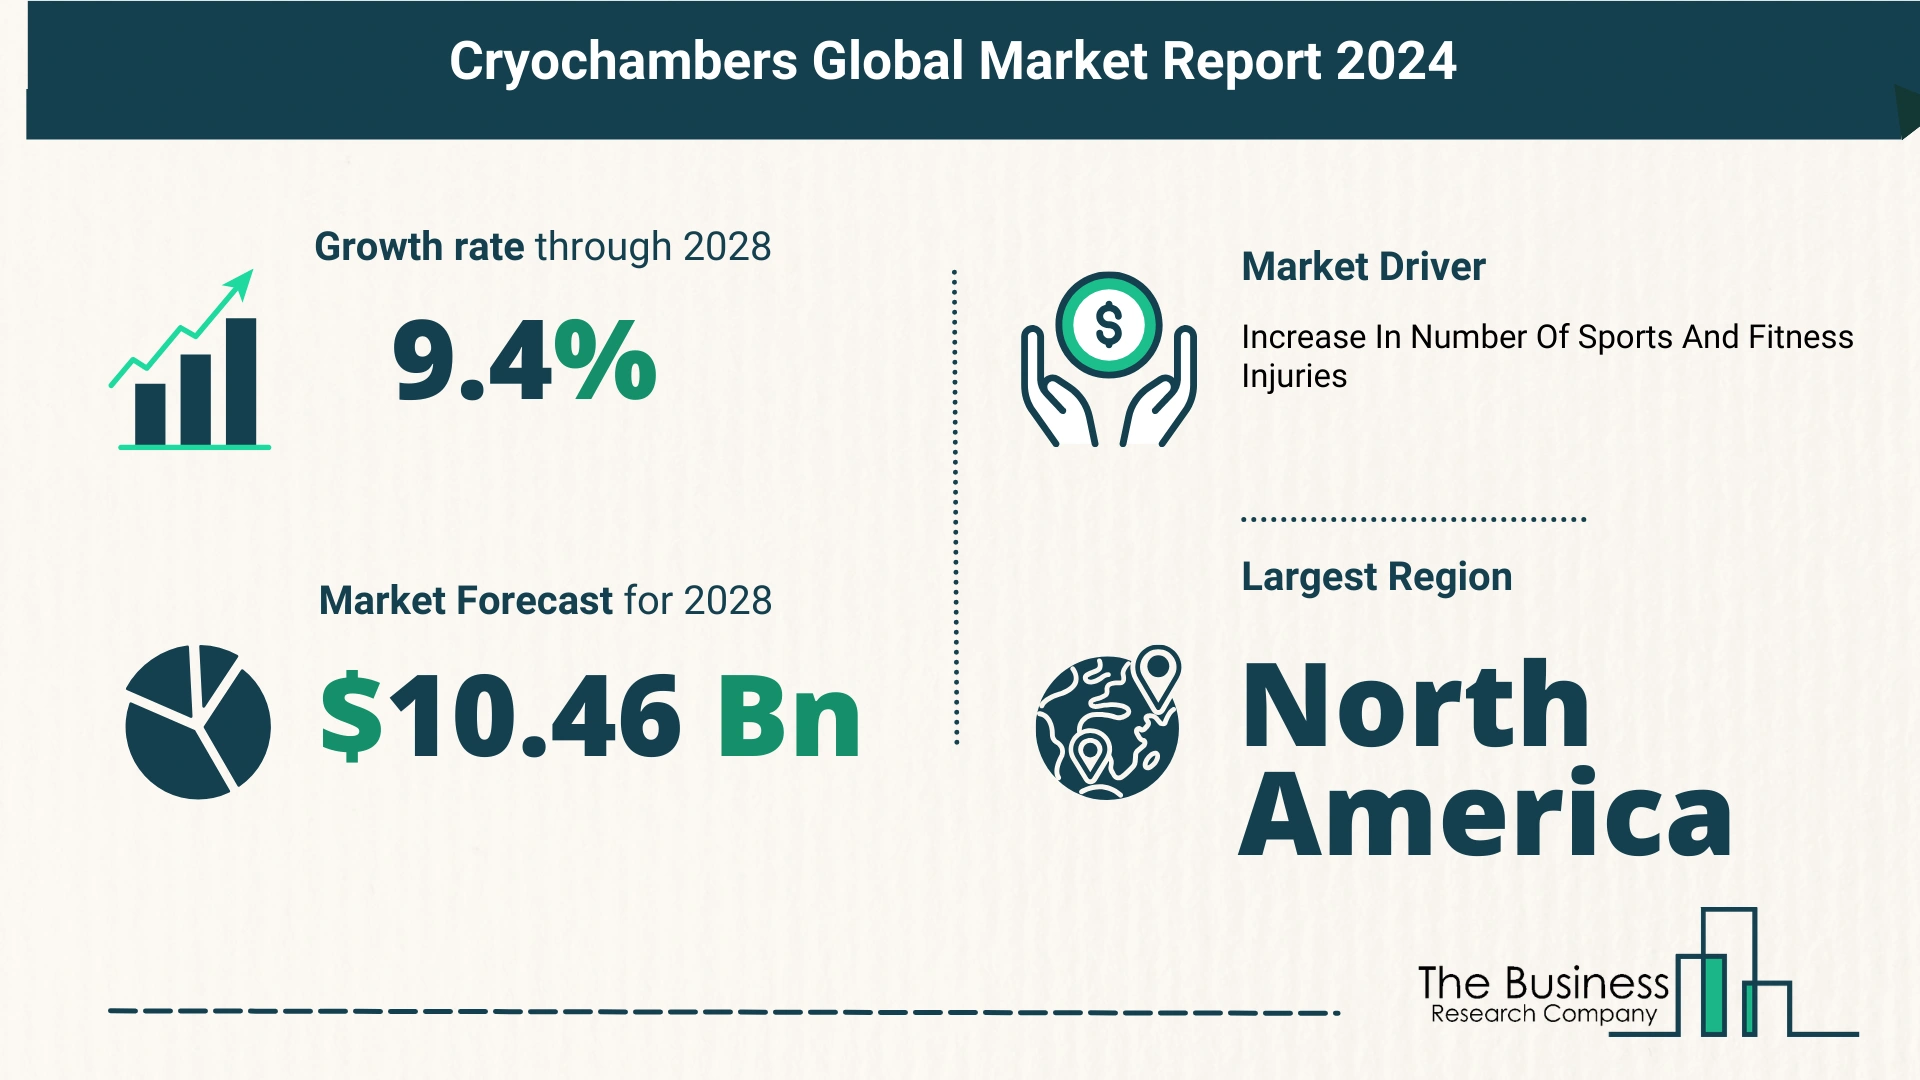 Key Trends And Drivers In The Cryochambers Market 2024